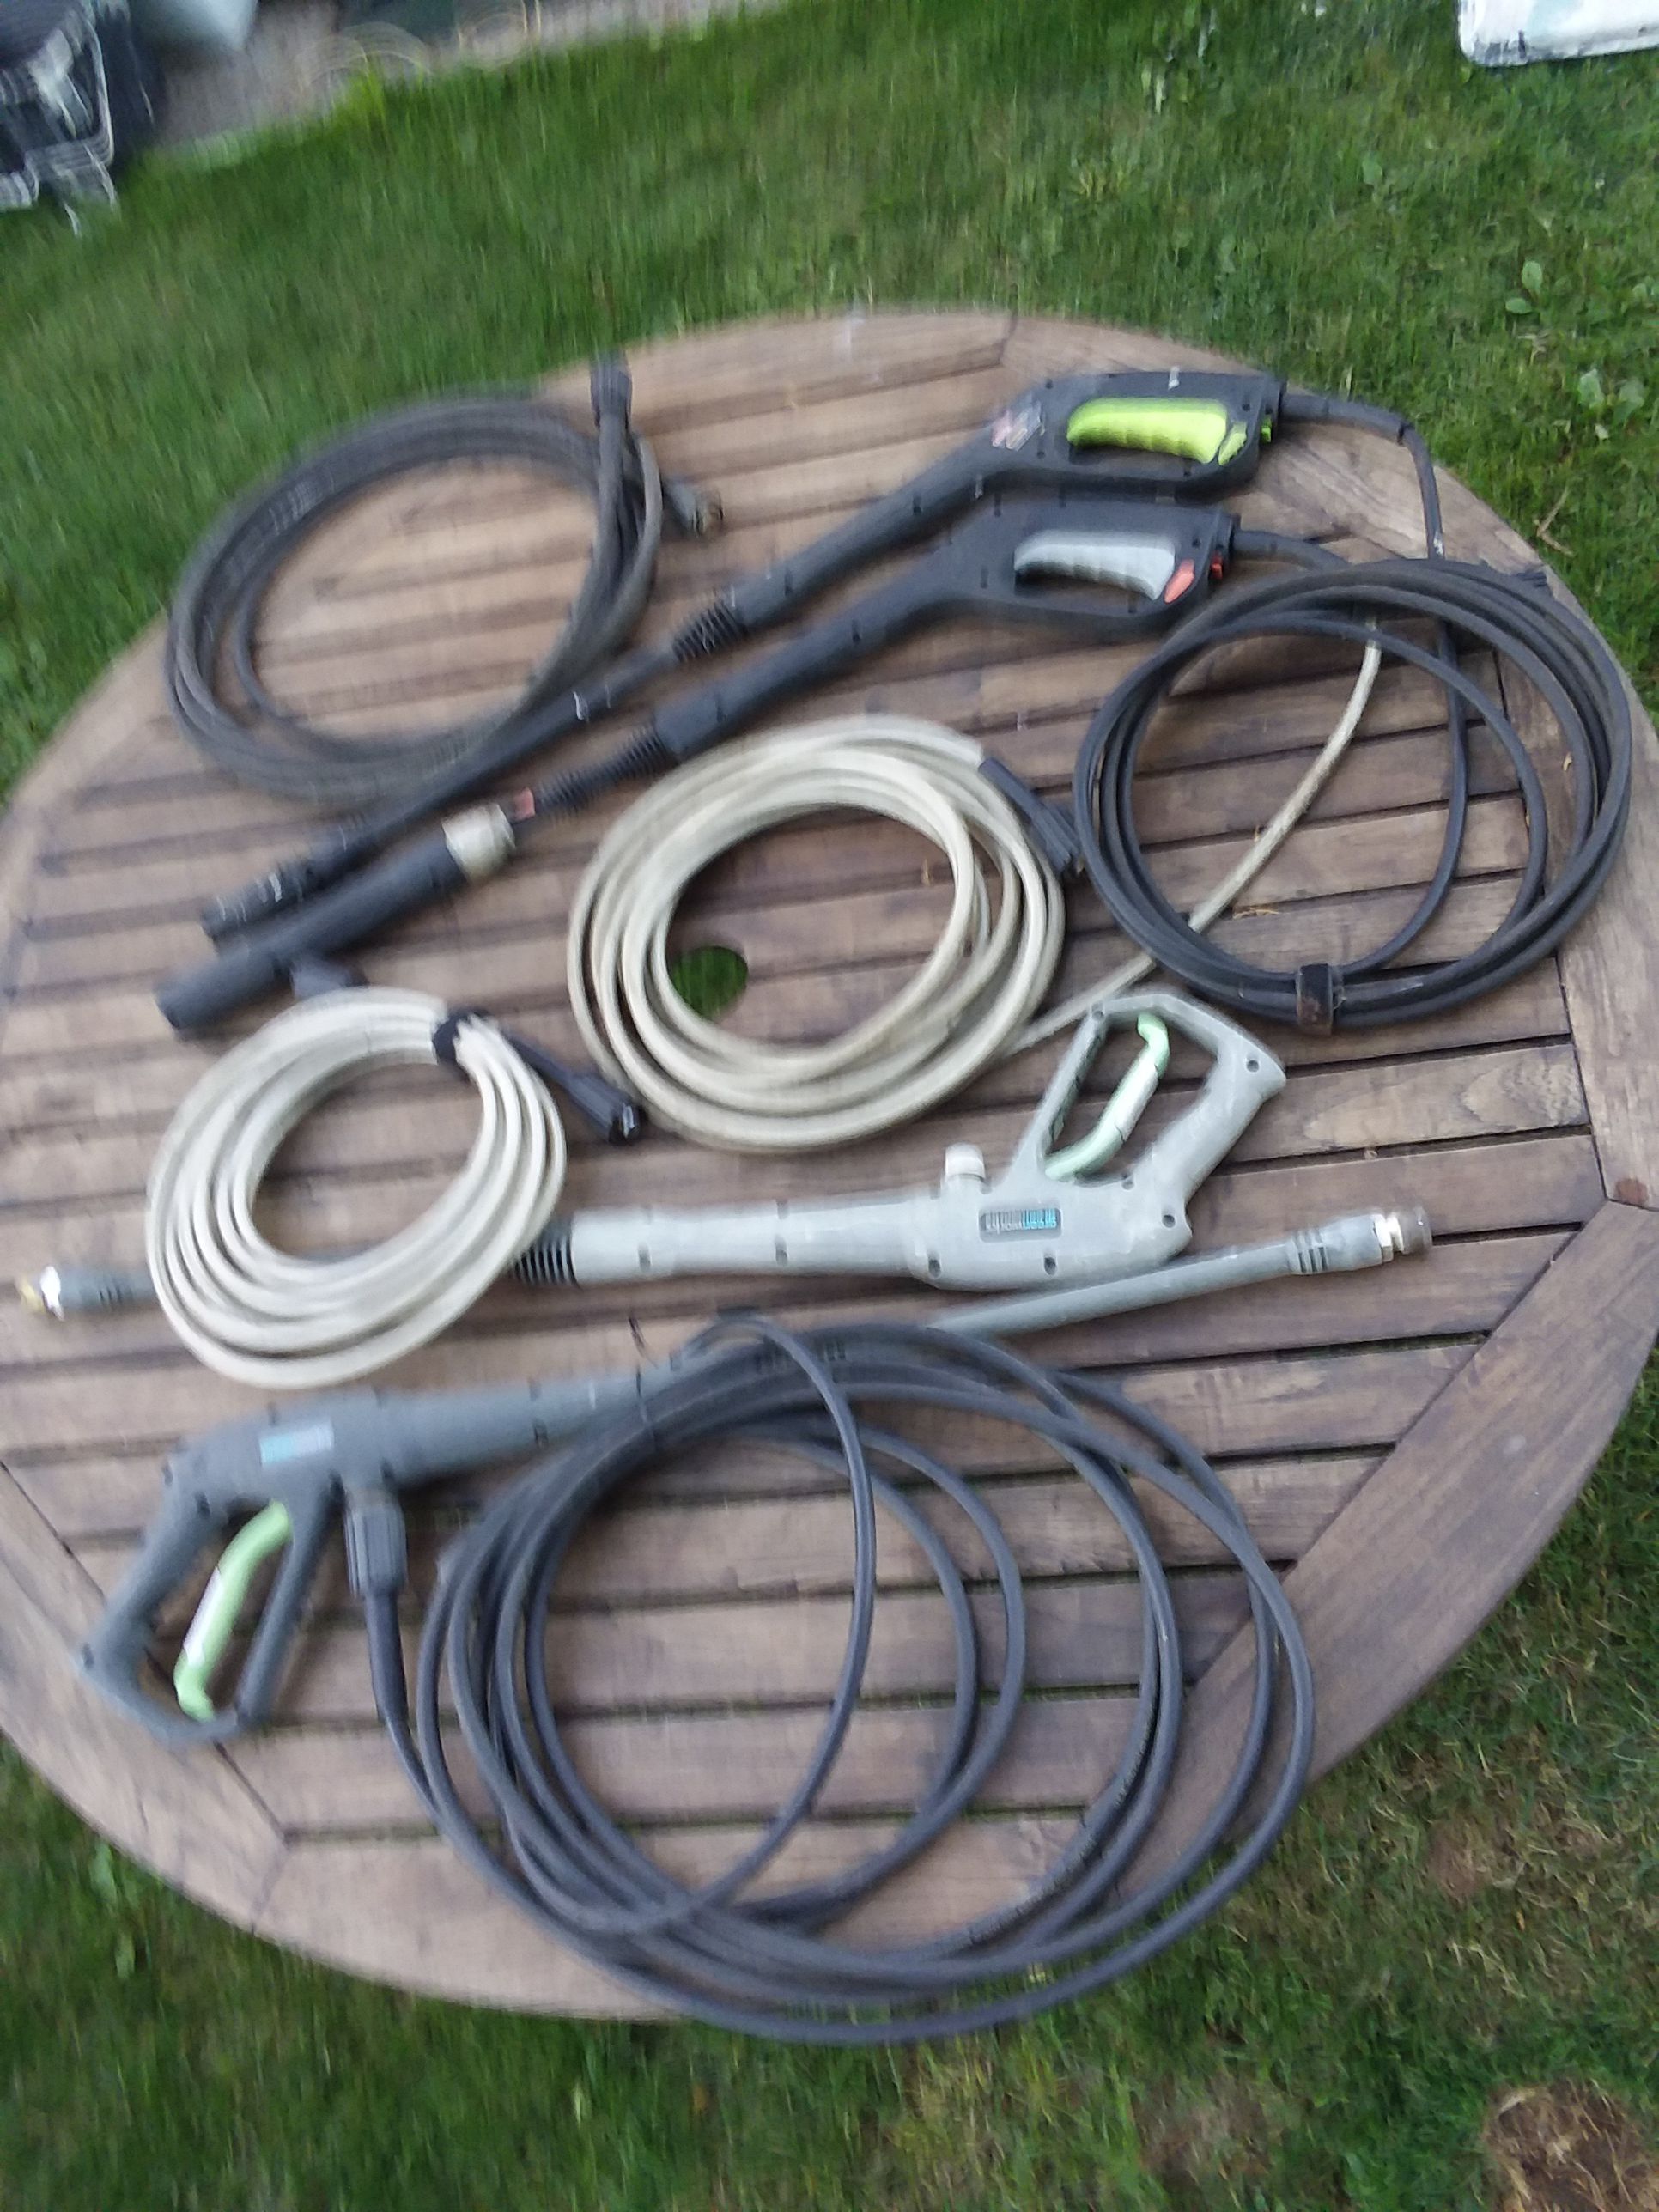 pressure washer wands, greenworks,with attached hoses, and 2 seperate hoses